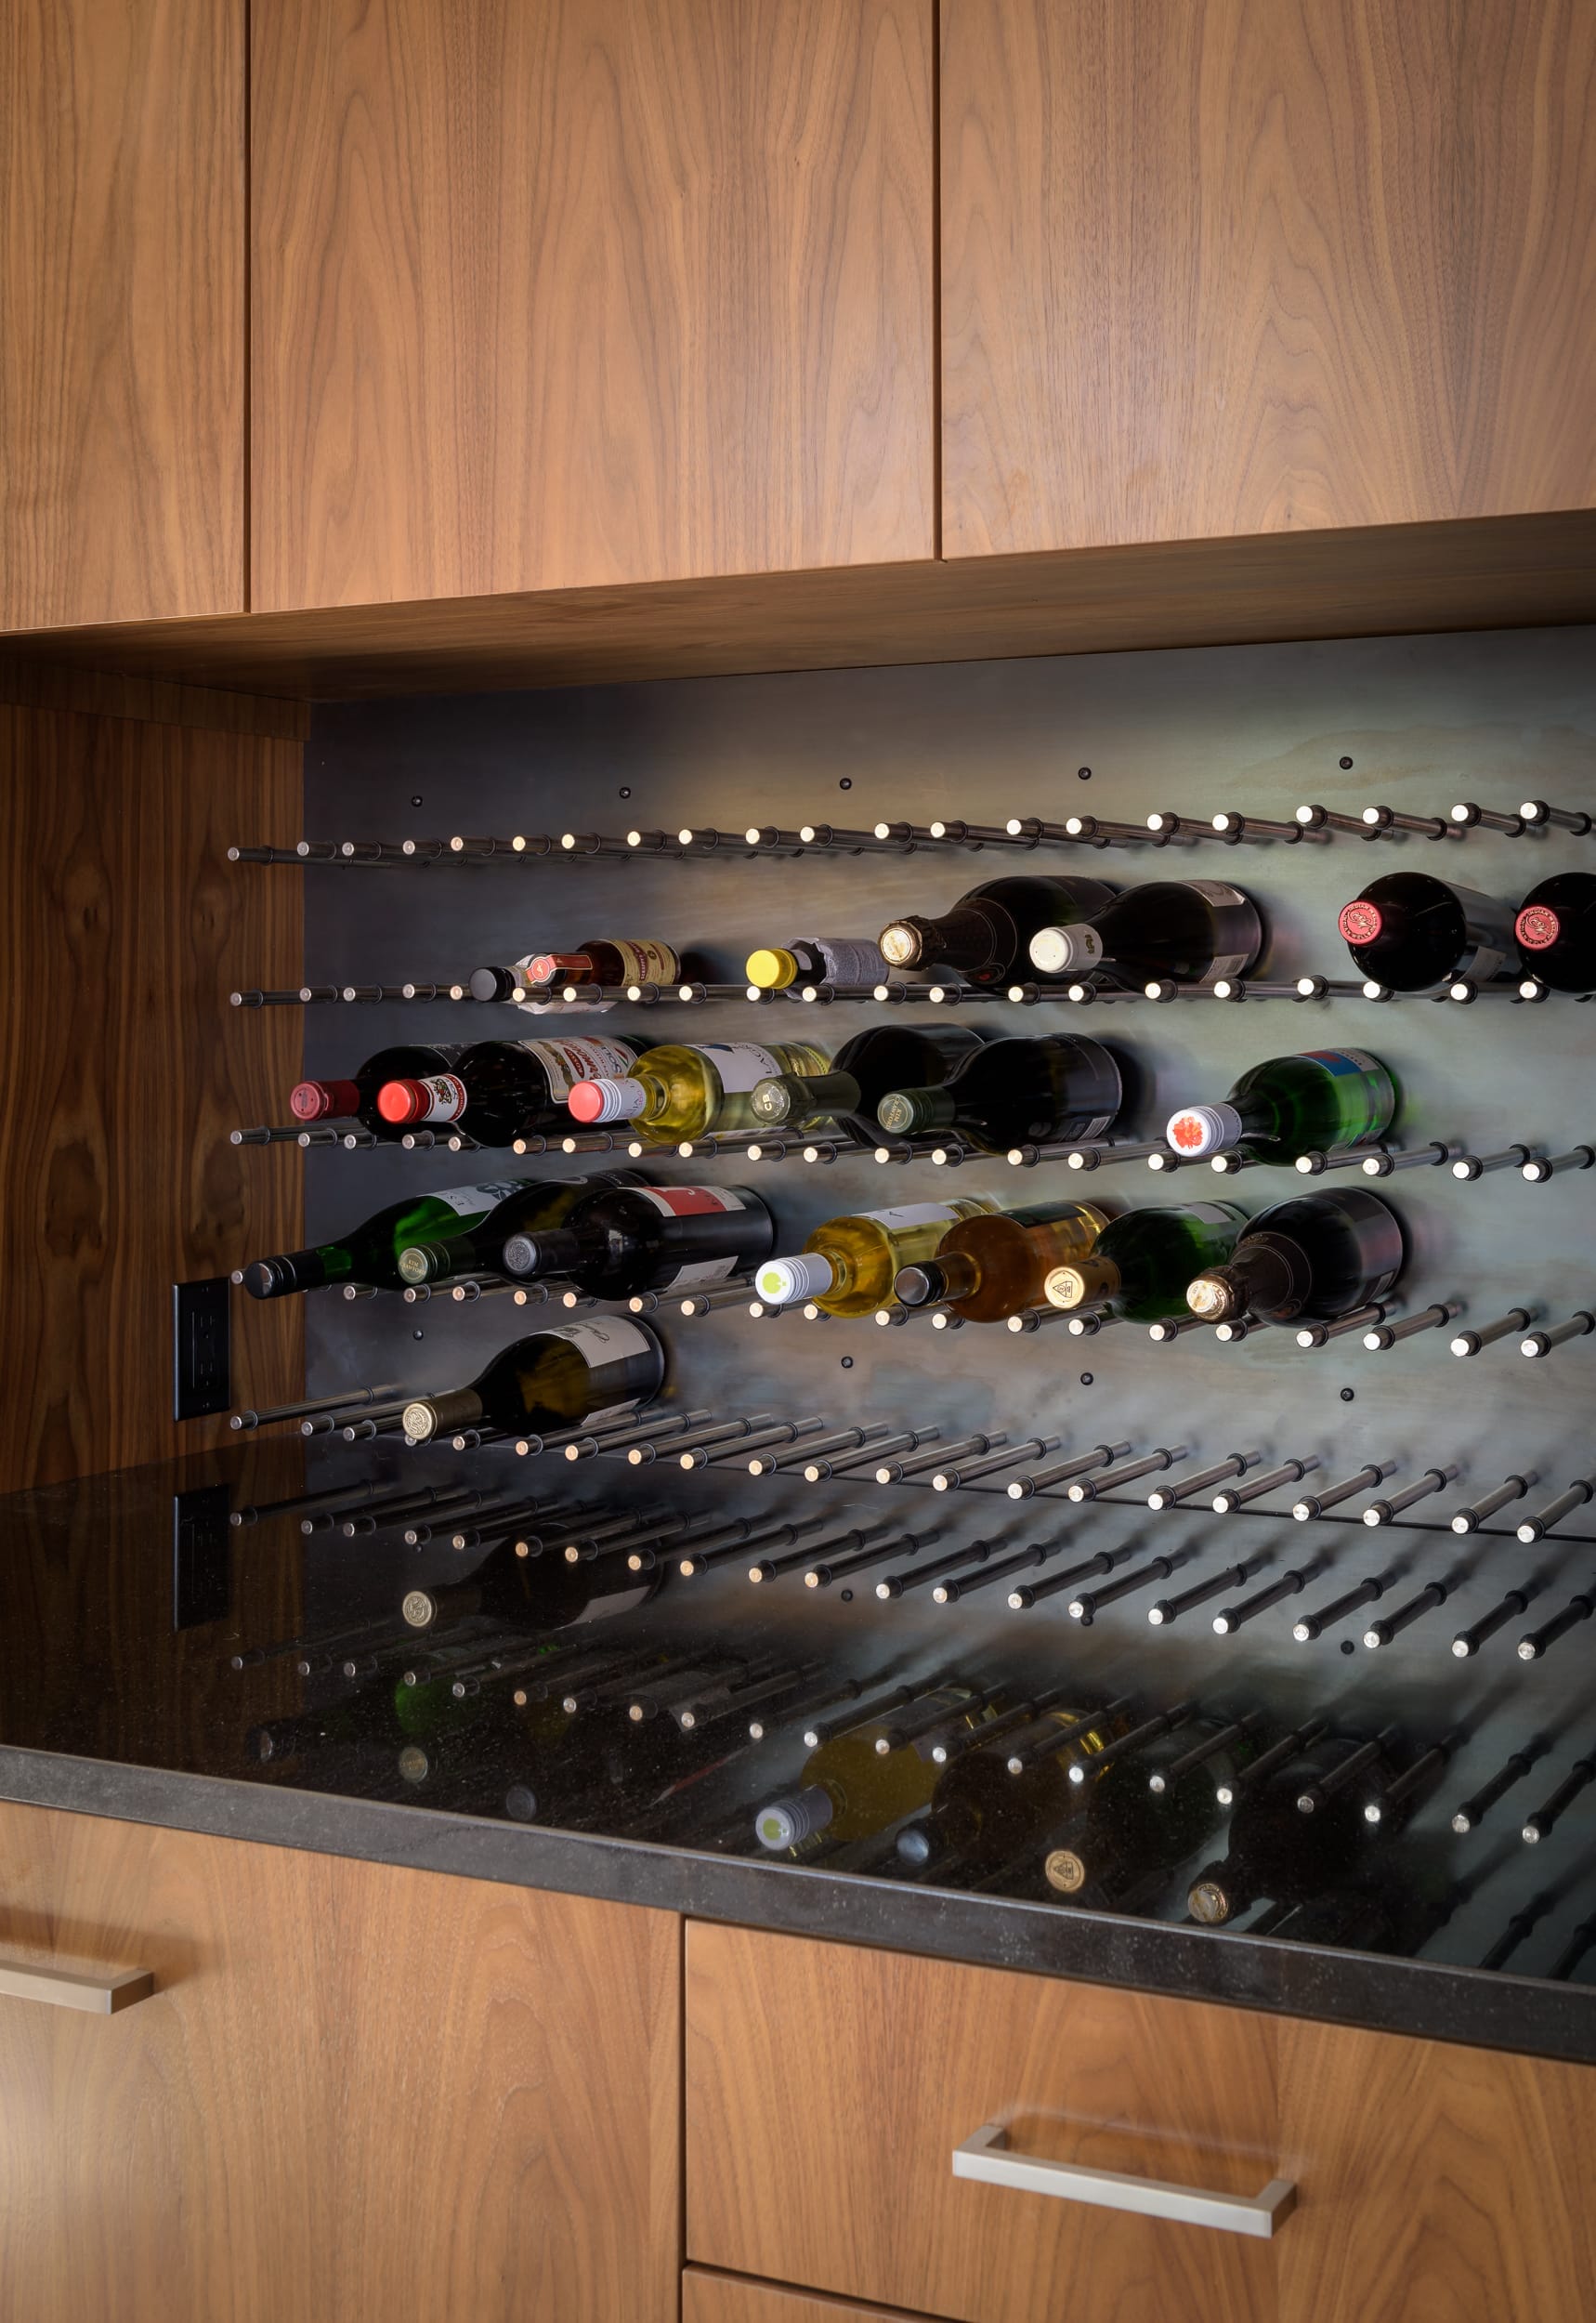 A kitchen with a wine rack full of bottles.